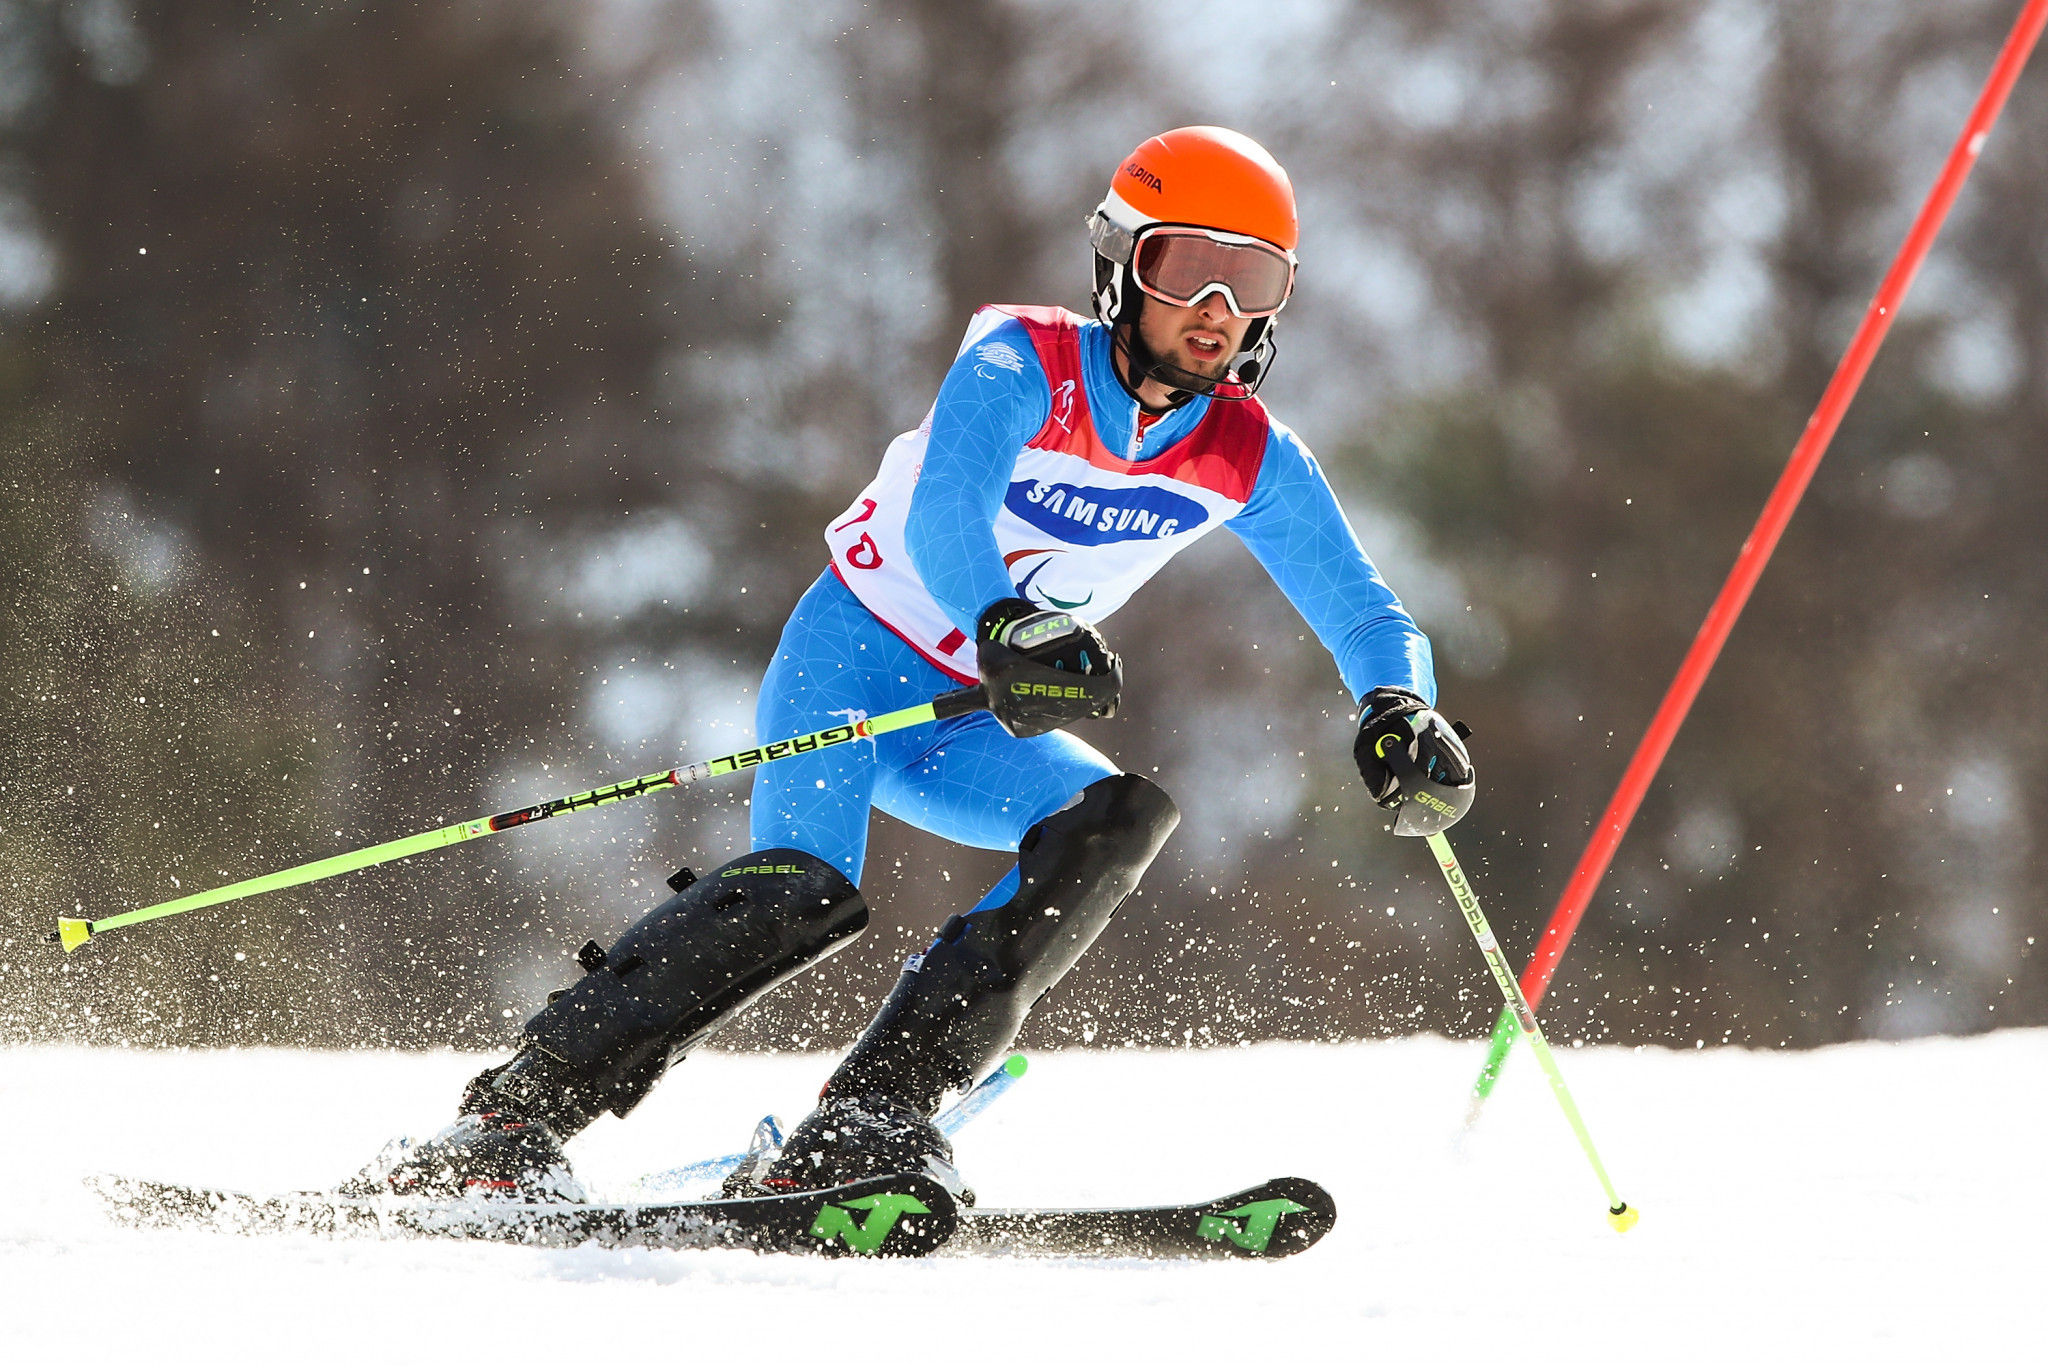 Giacomo Bertagnolli earned a third slalom win at the World Para Alpine Skiing World Cup in Italy ©Getty Images